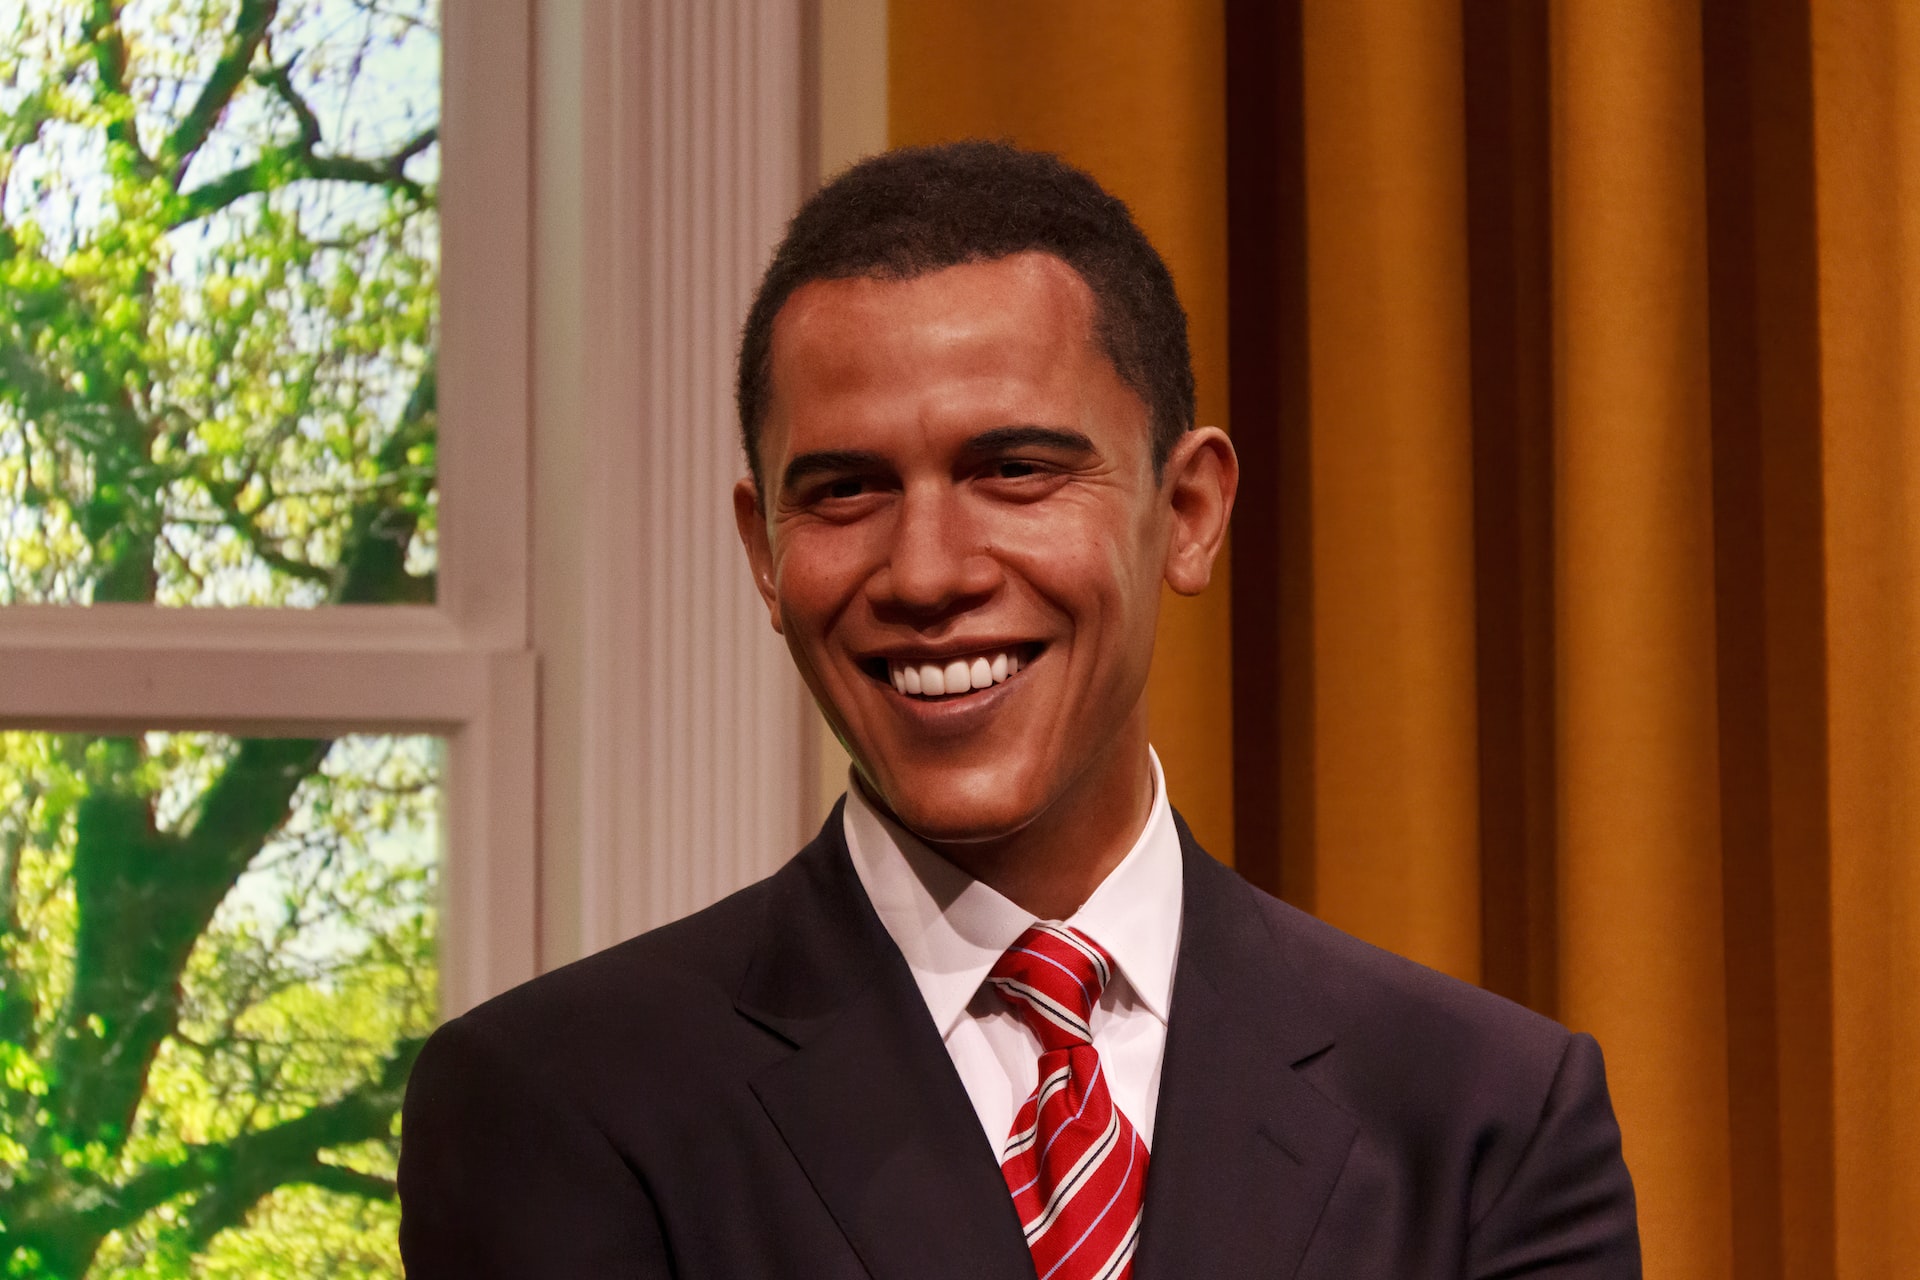 Wax figure of a smiling Barack Obama in dark suit and red tie standing by a window